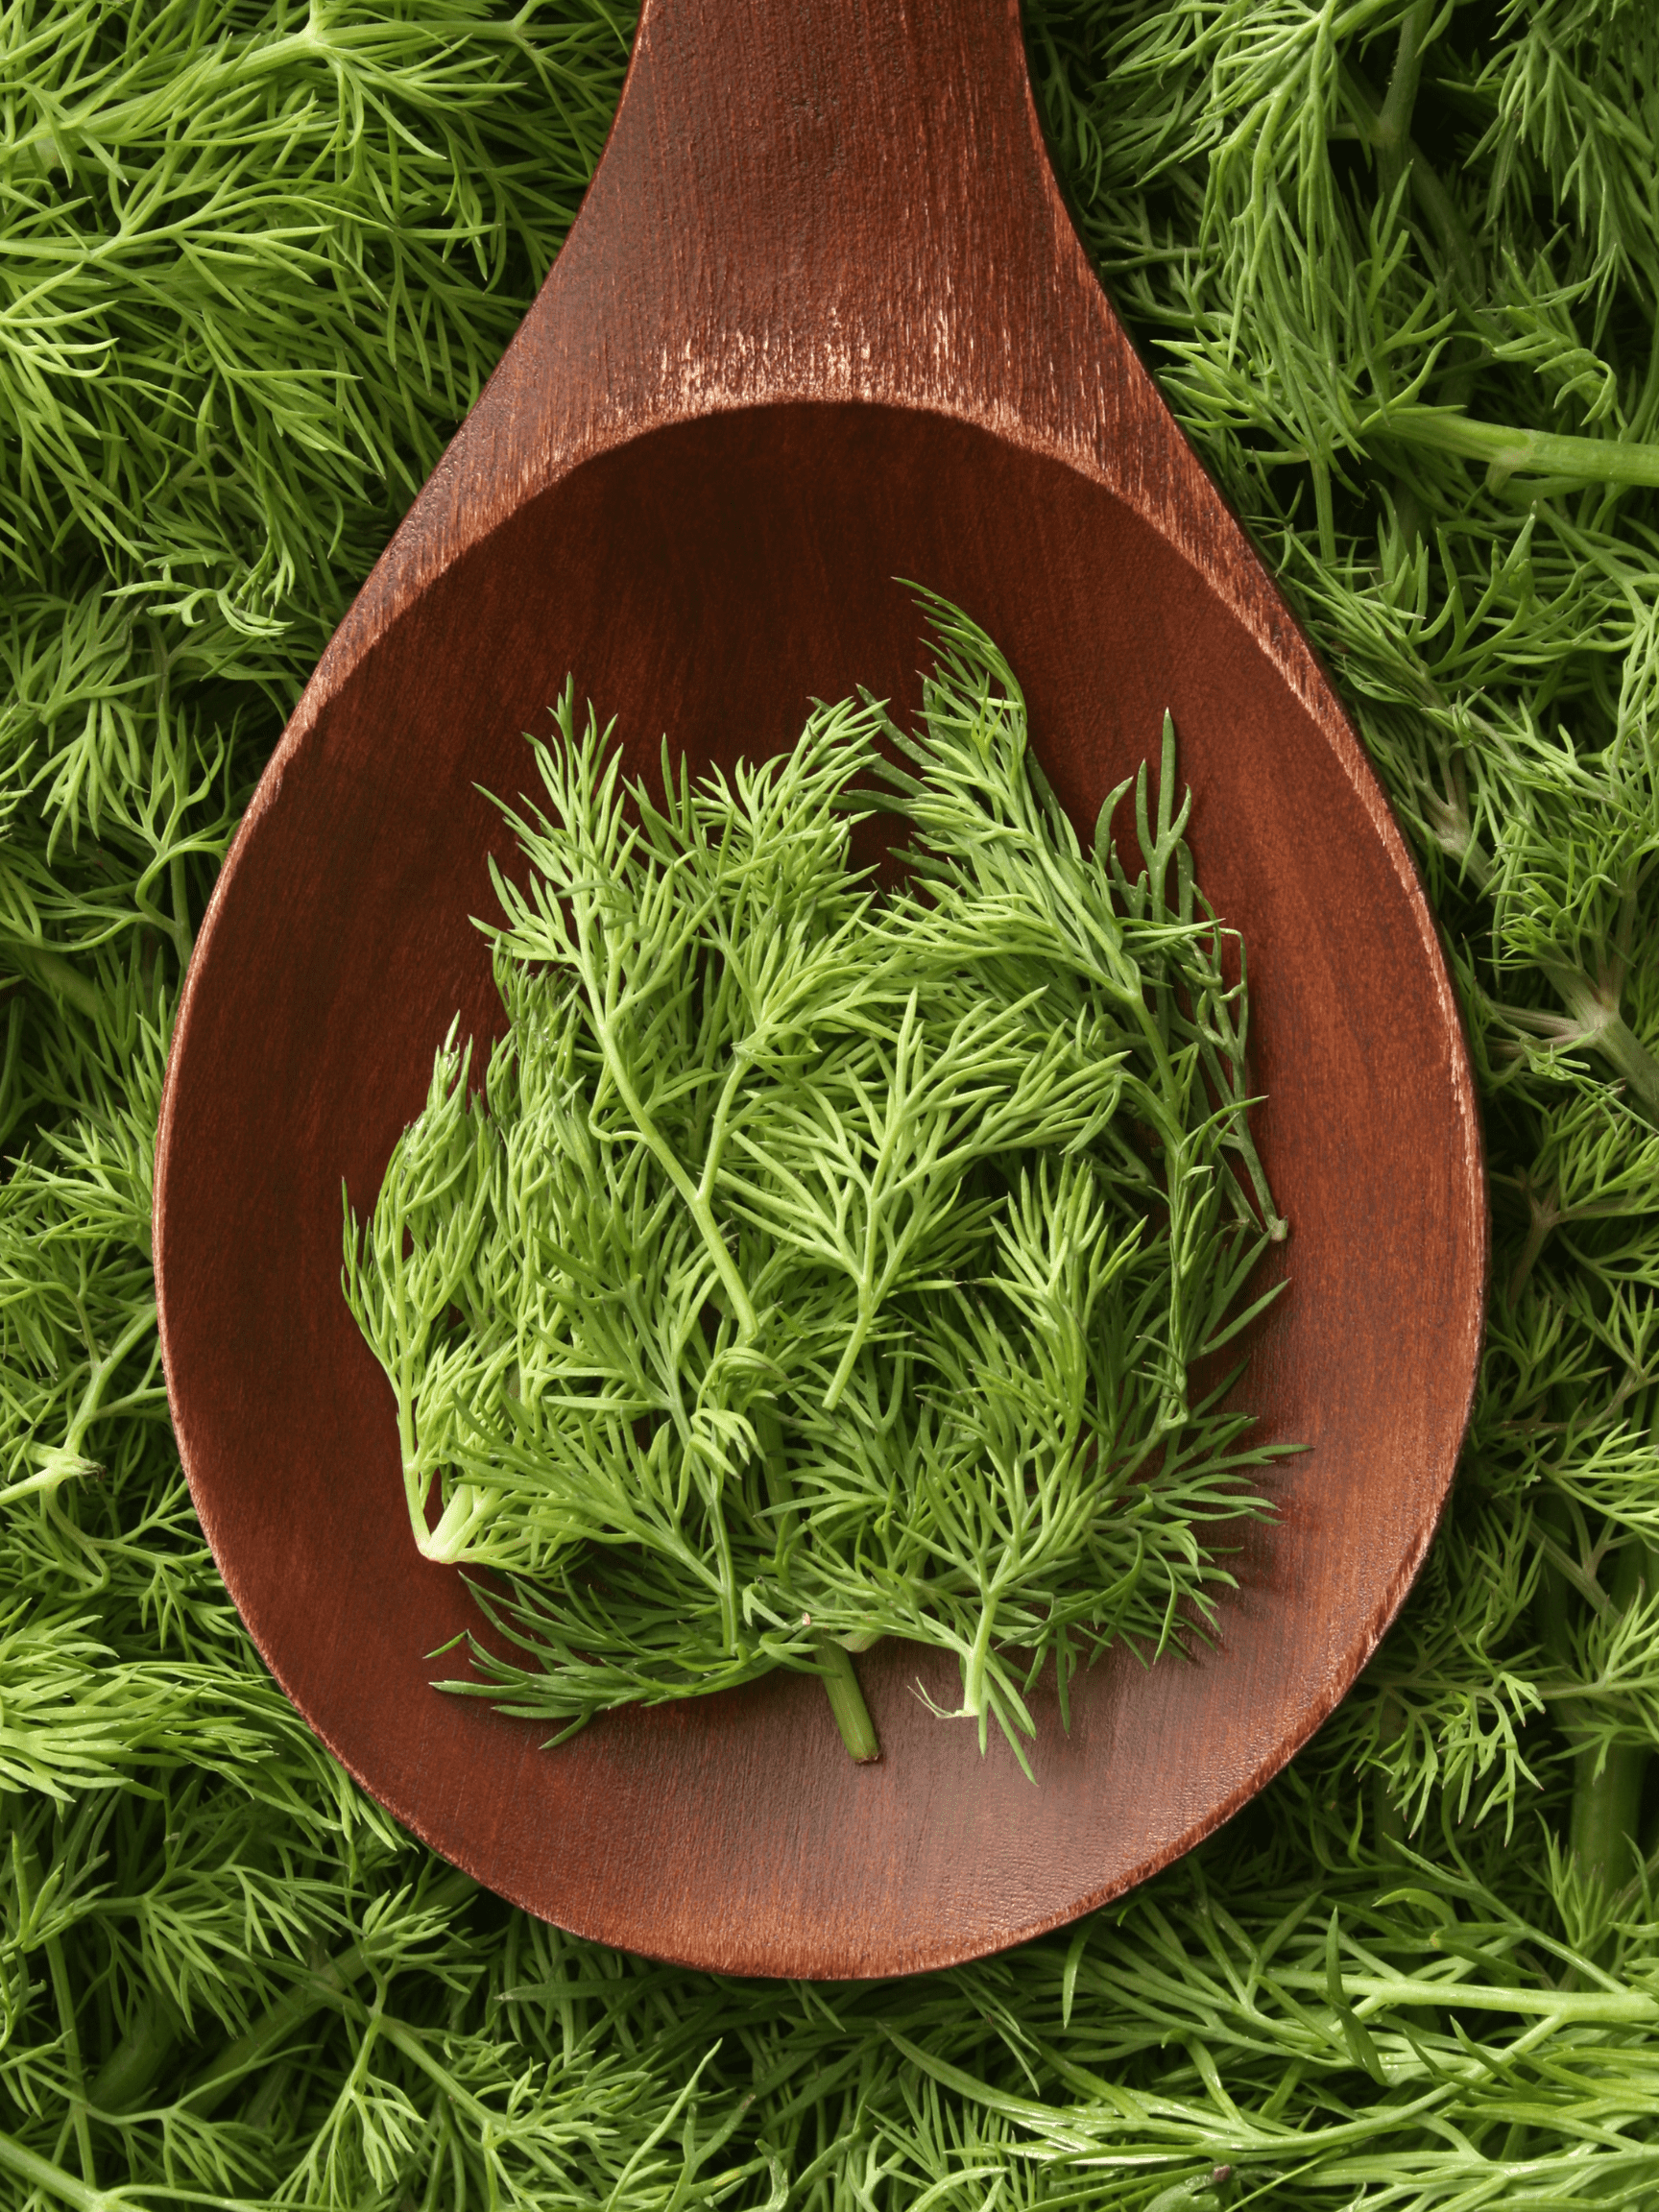 Dill on a wooden spoon.